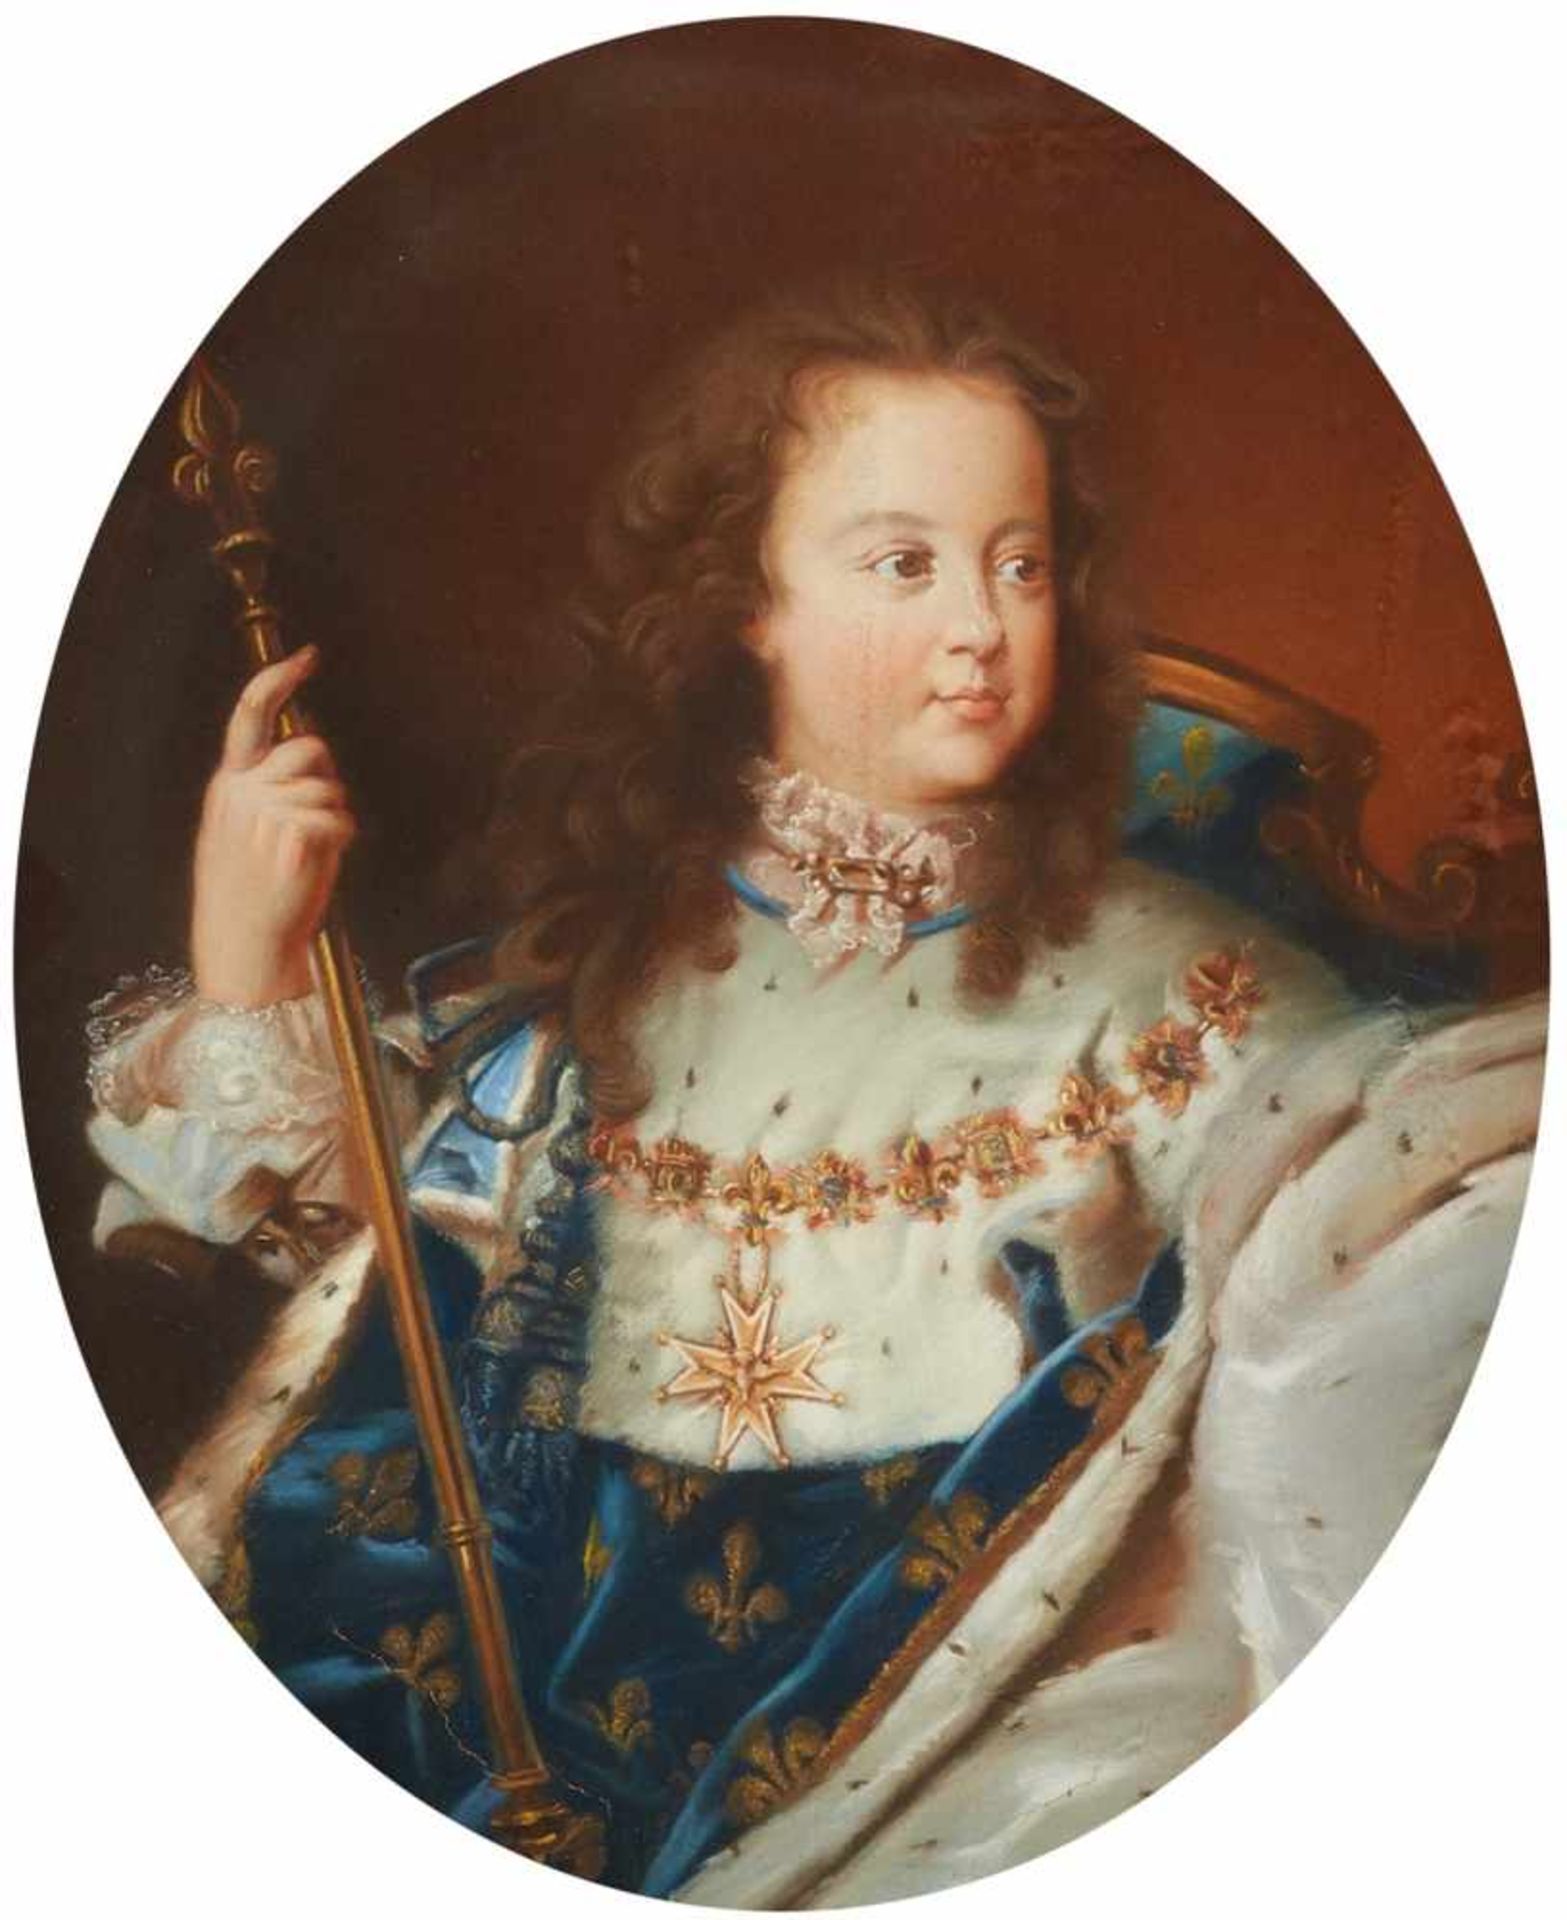 French School, 18th/19th centuryPortrait of Louis XV after Hyacinthe Rigaud